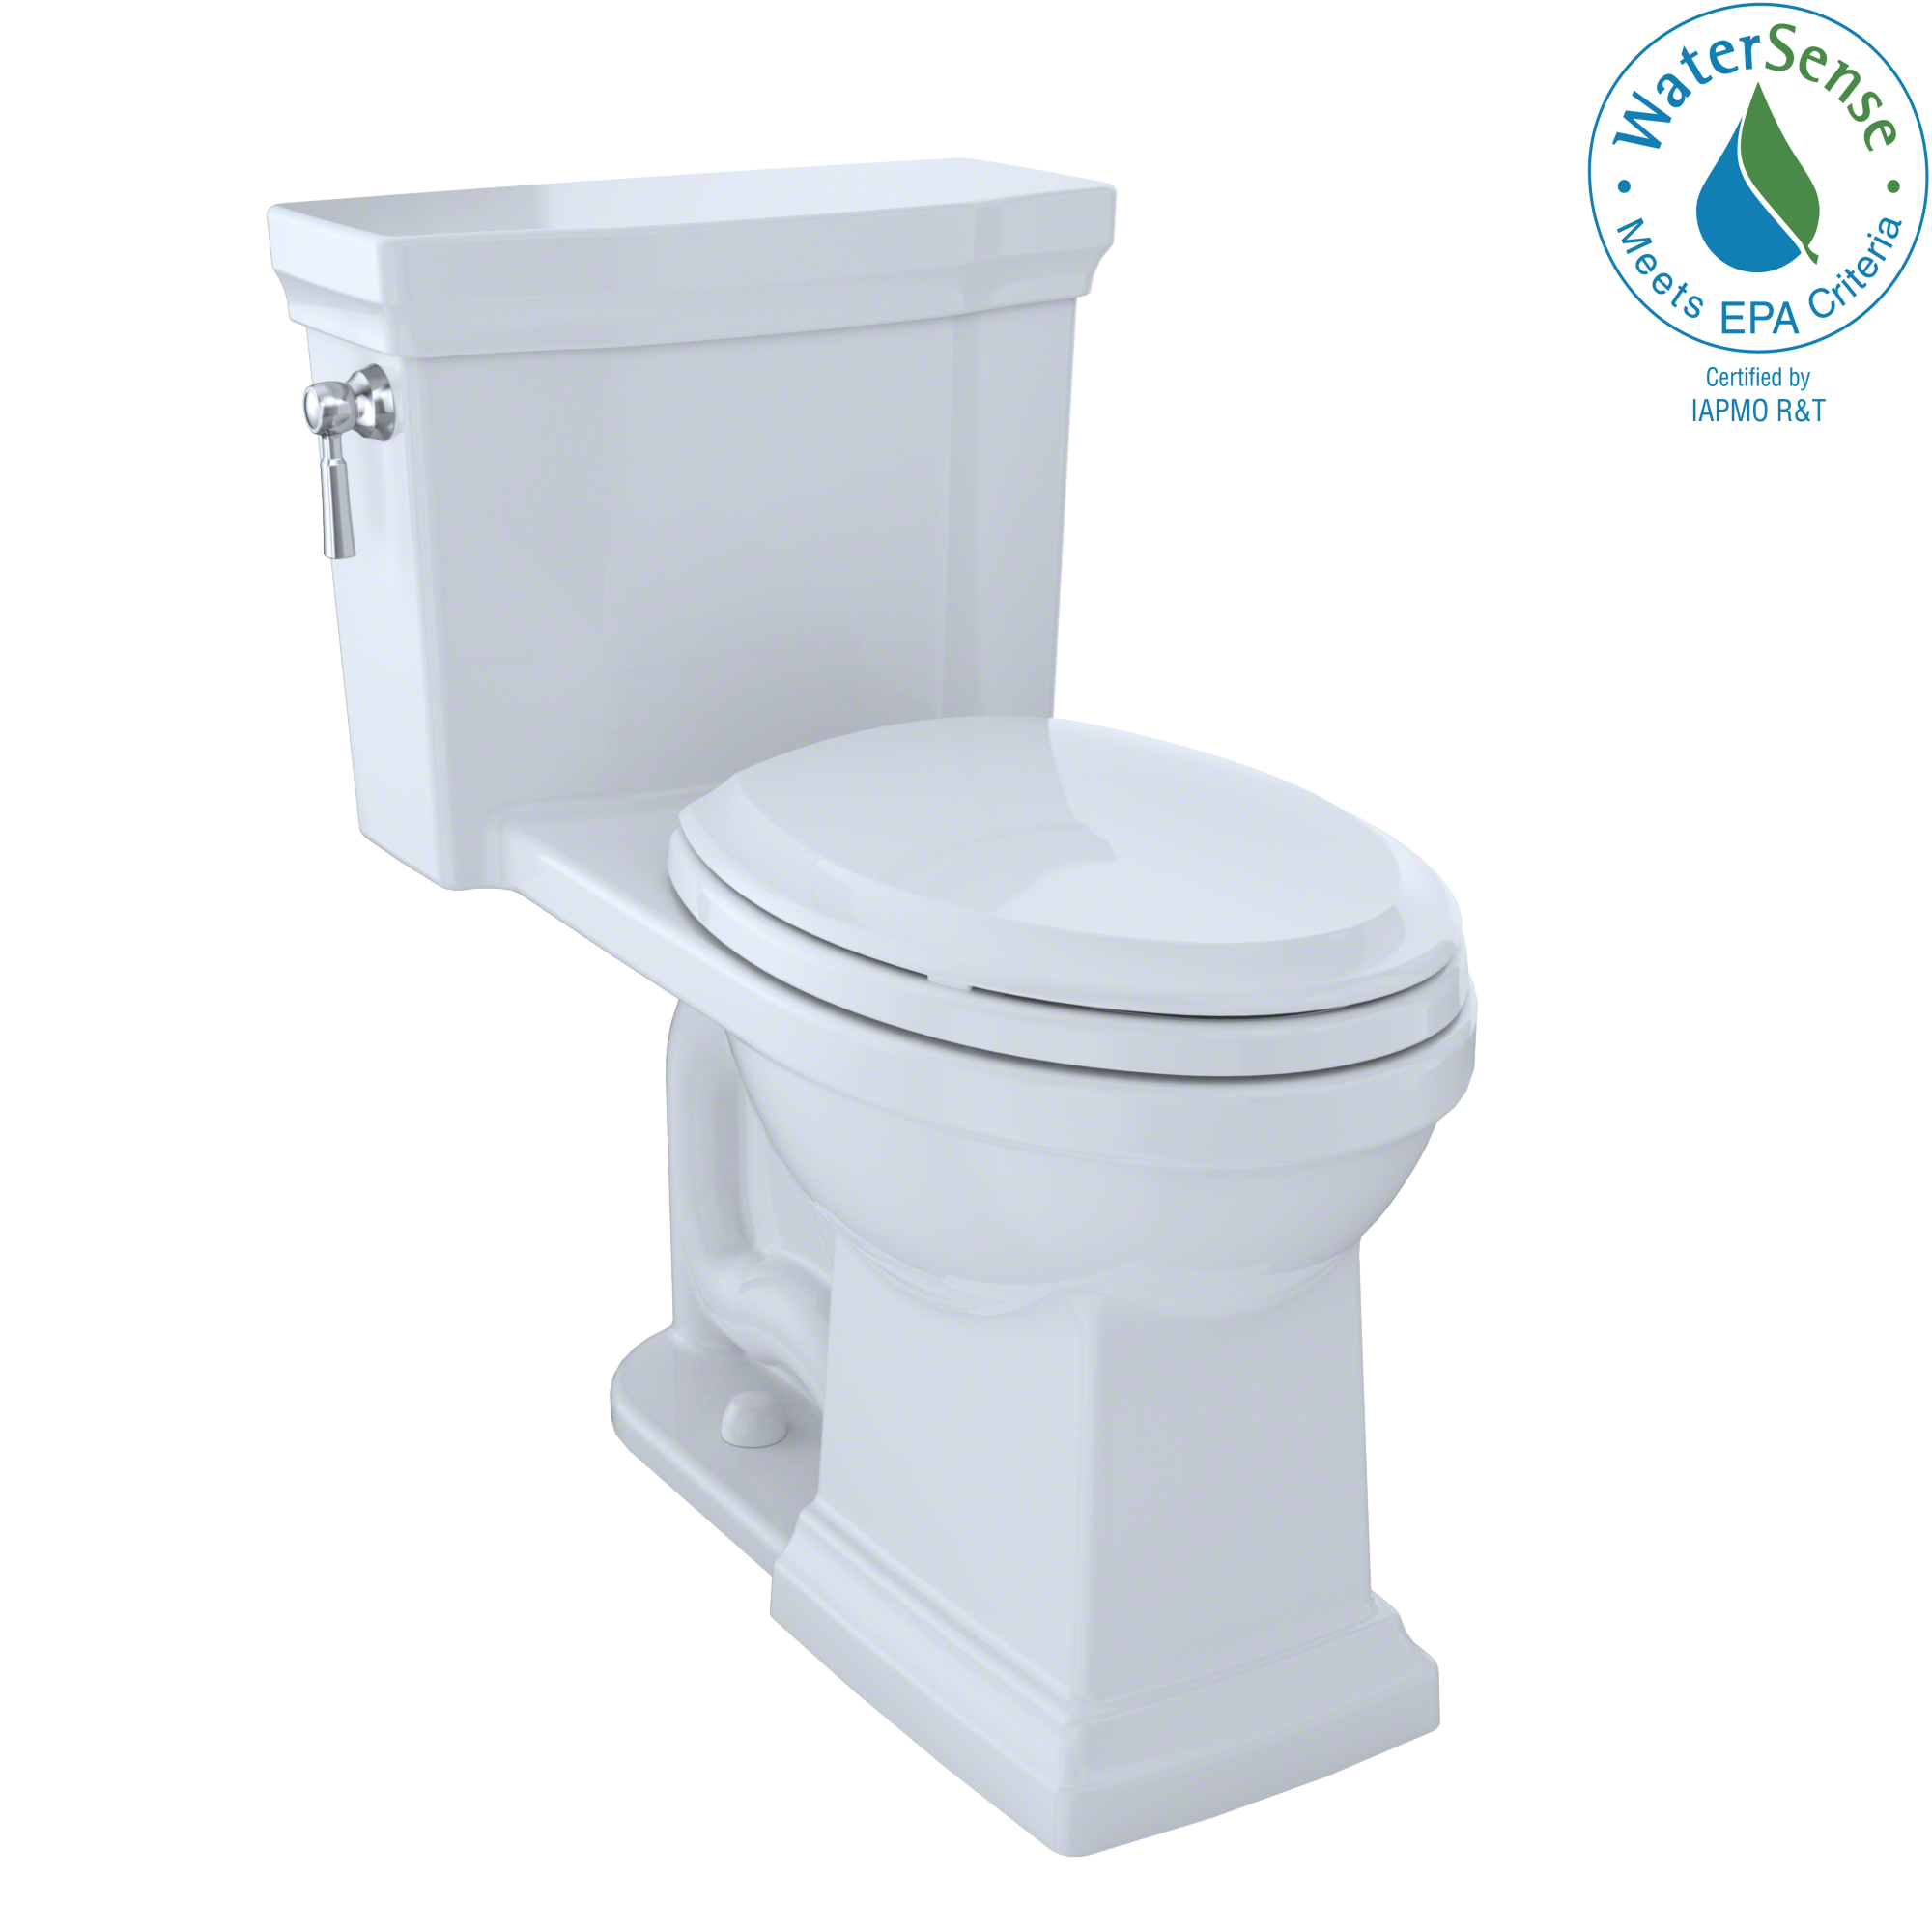 PROMENADE II MS814224CEFG#01 ONE-PIECE TOILET - 1.28 GPF - SoftClose Seat Included